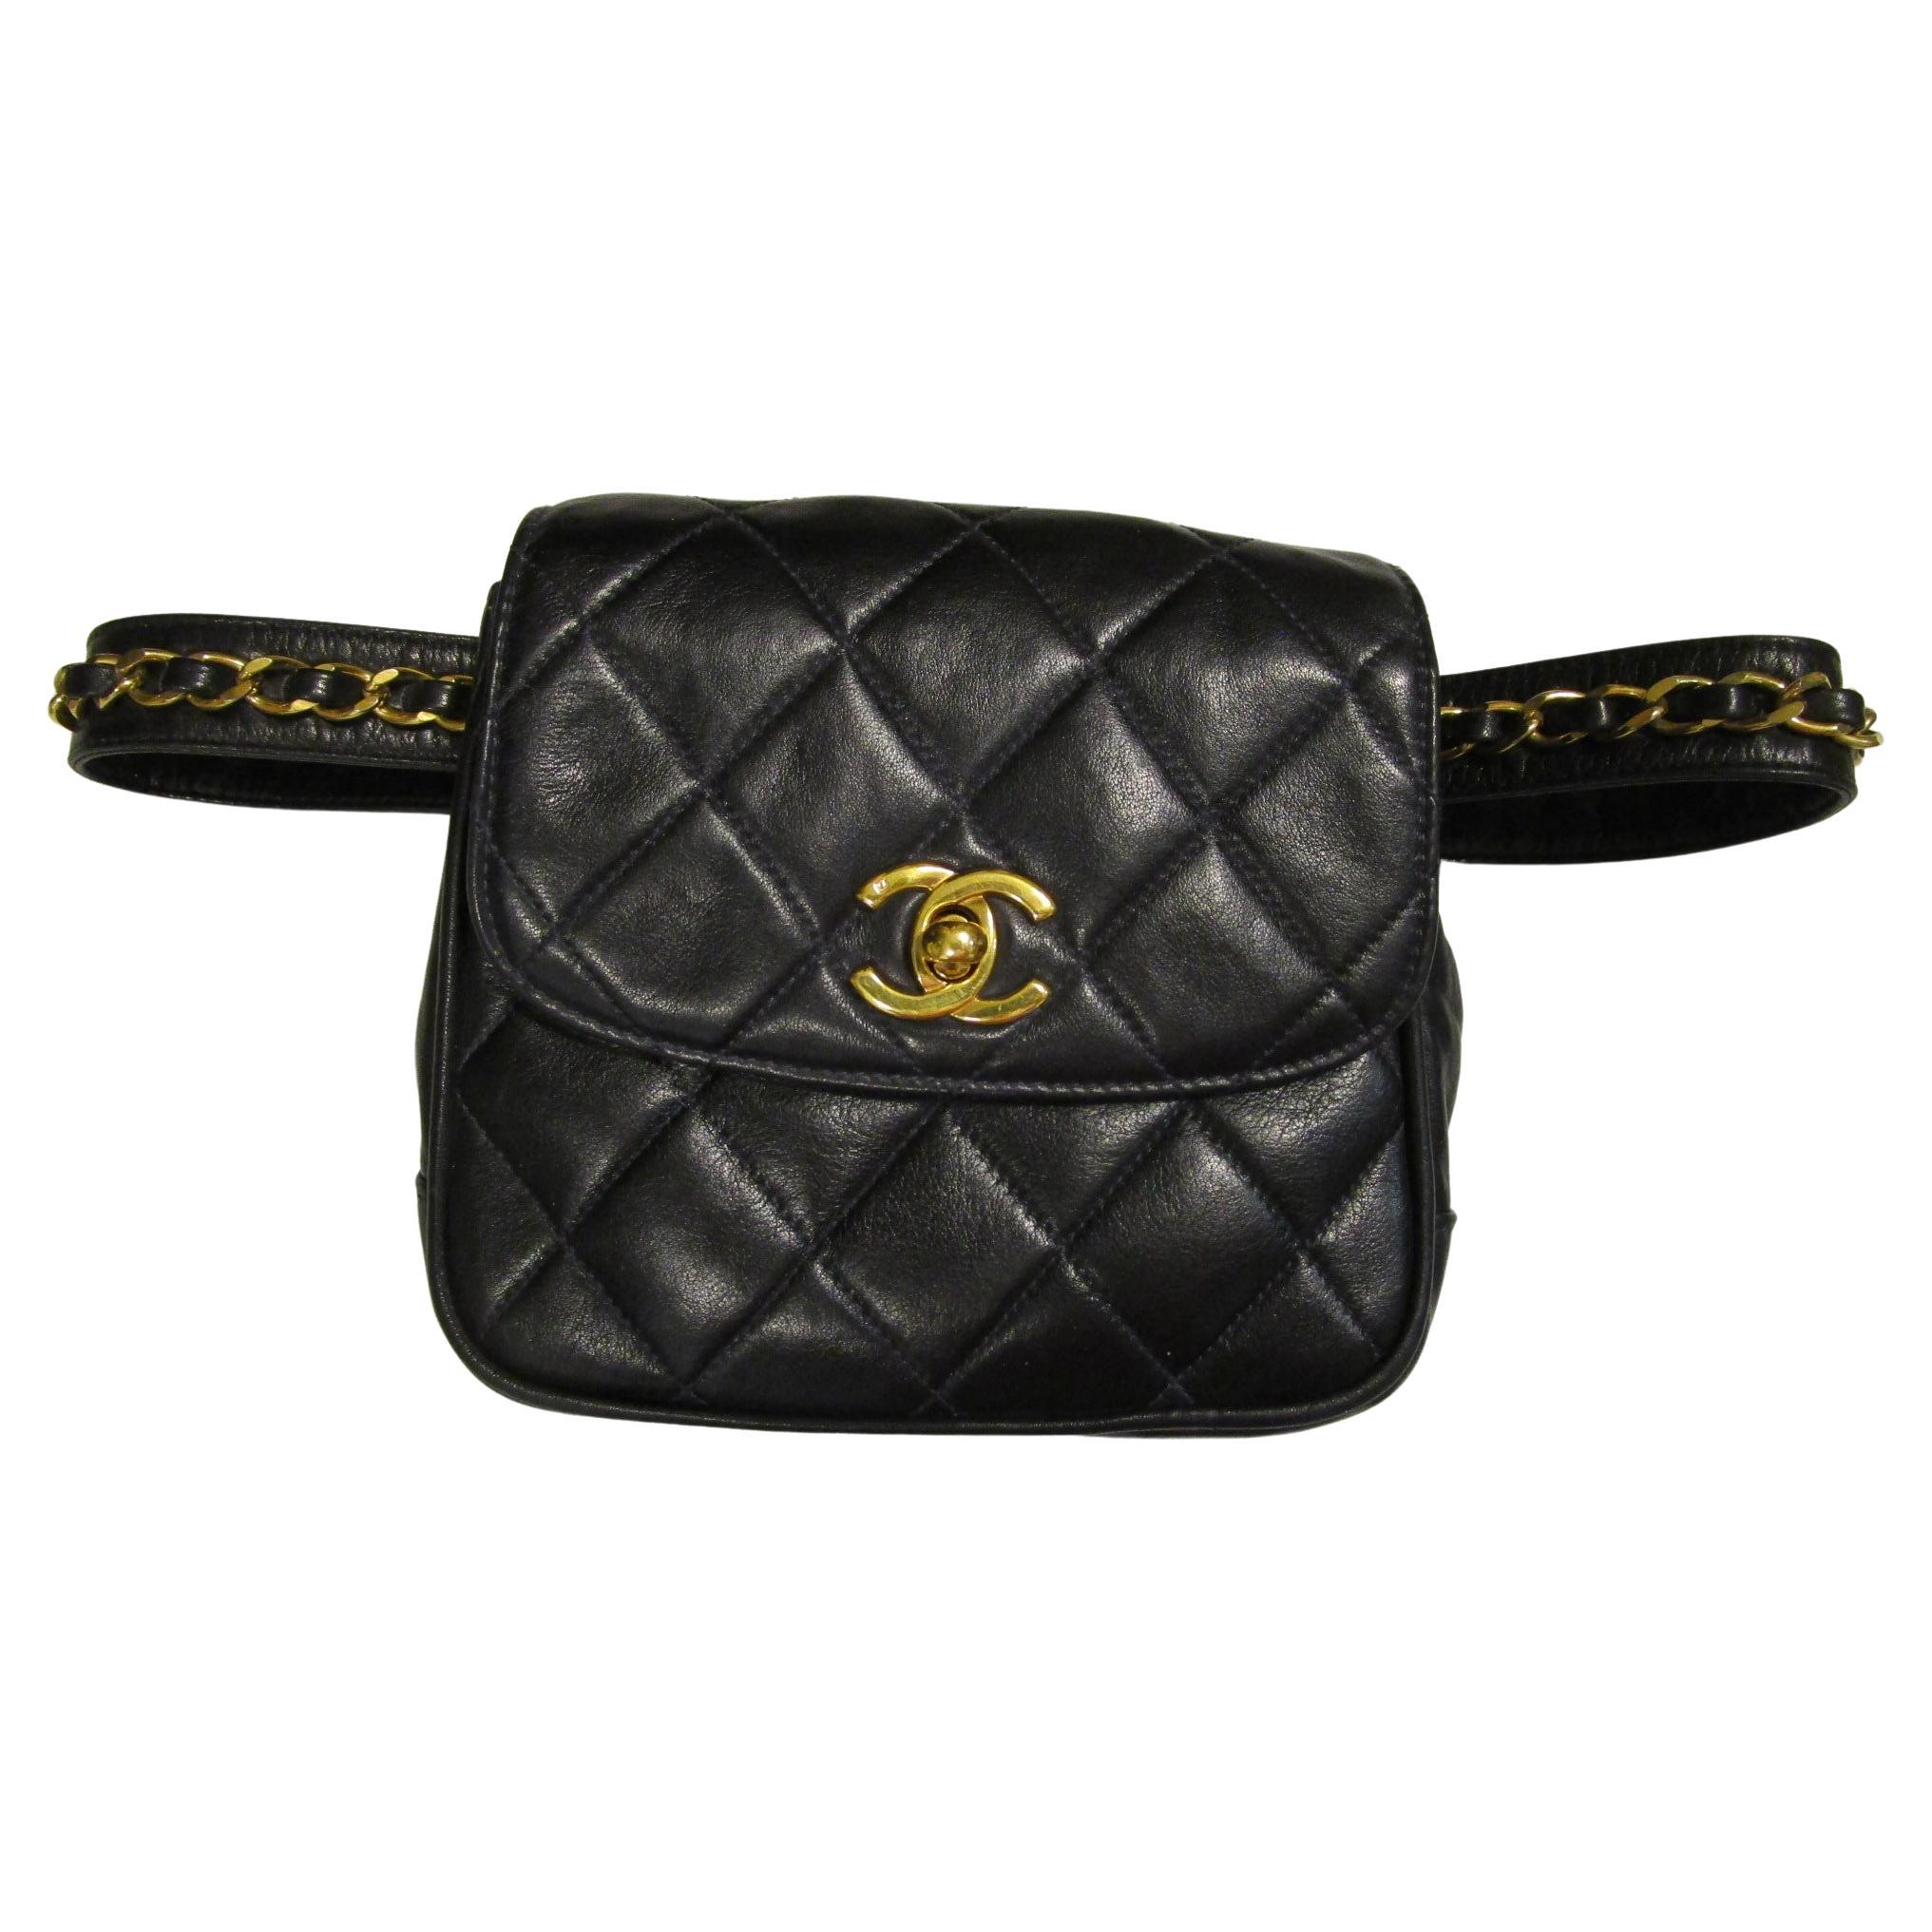 Sold at Auction: (2Pc) Chanel Quilted Tote Bag & Zip Pouch